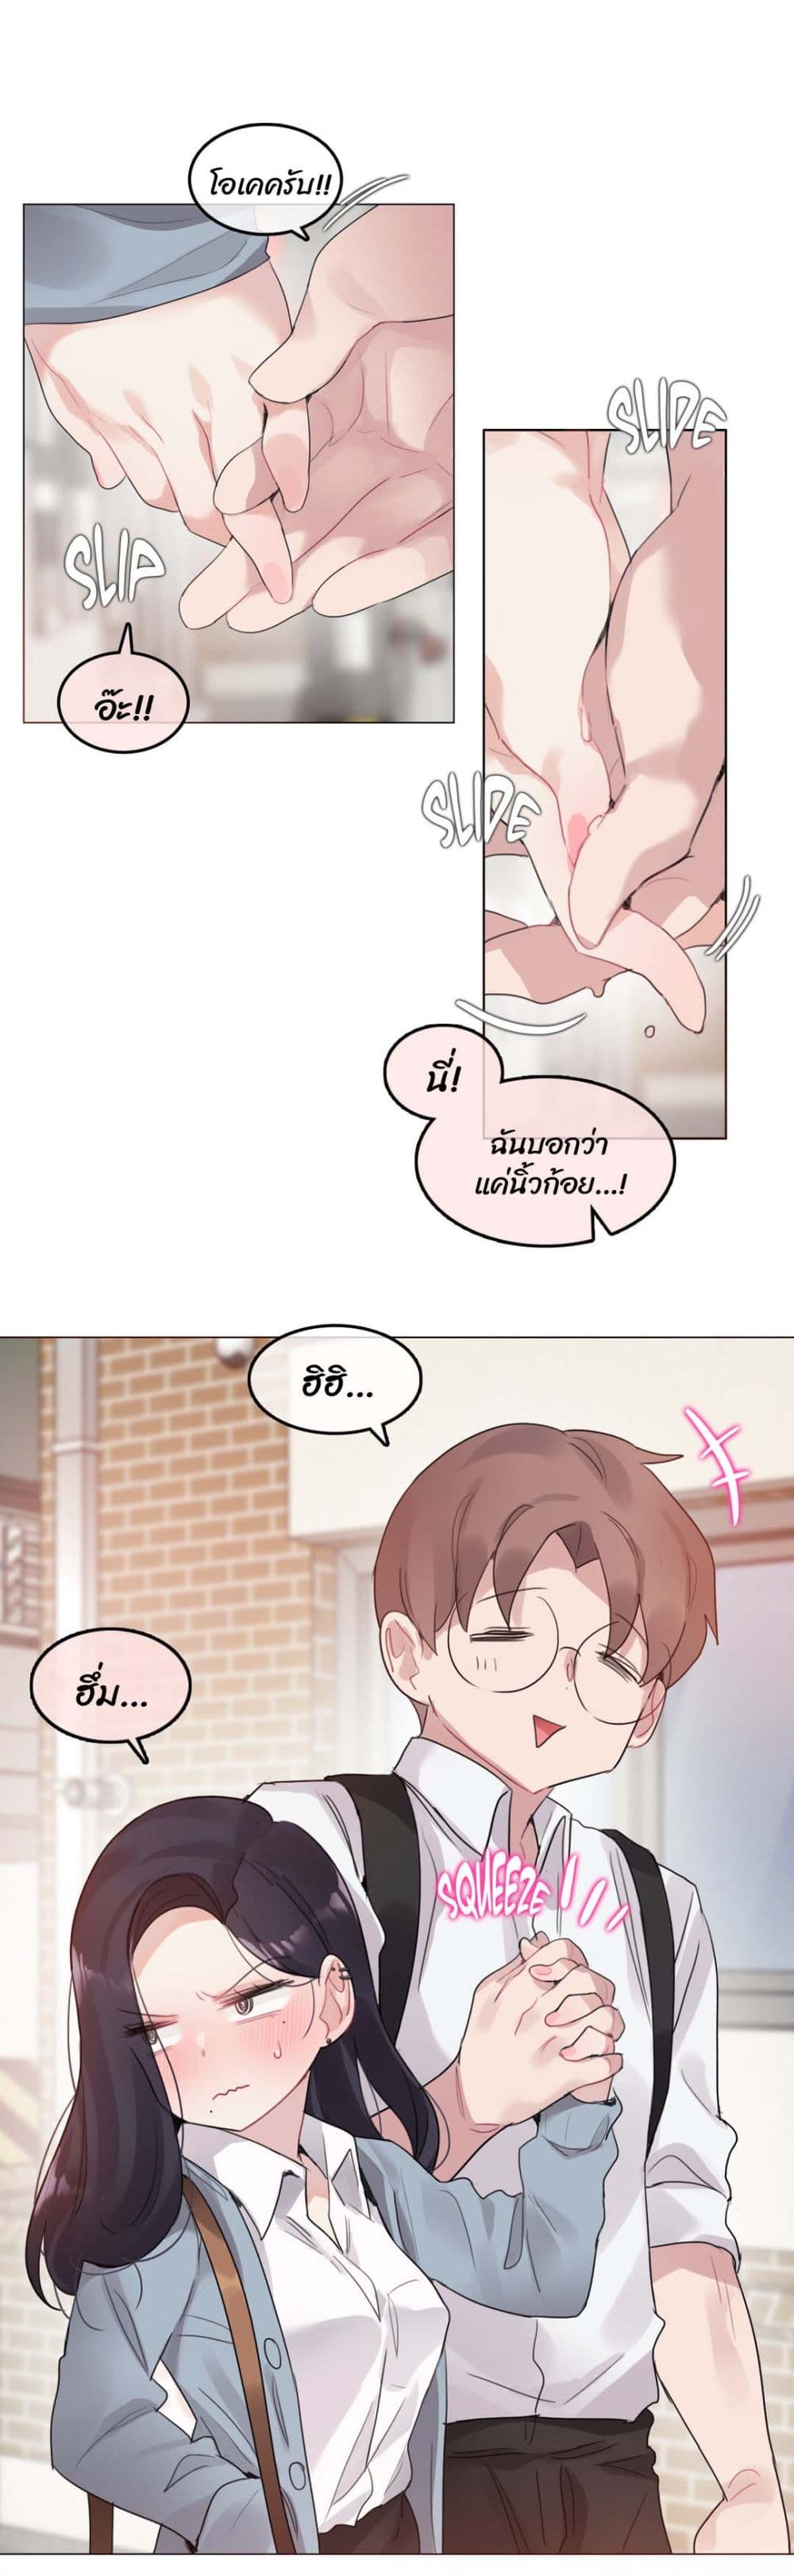 A Pervert's Daily Life 104-104